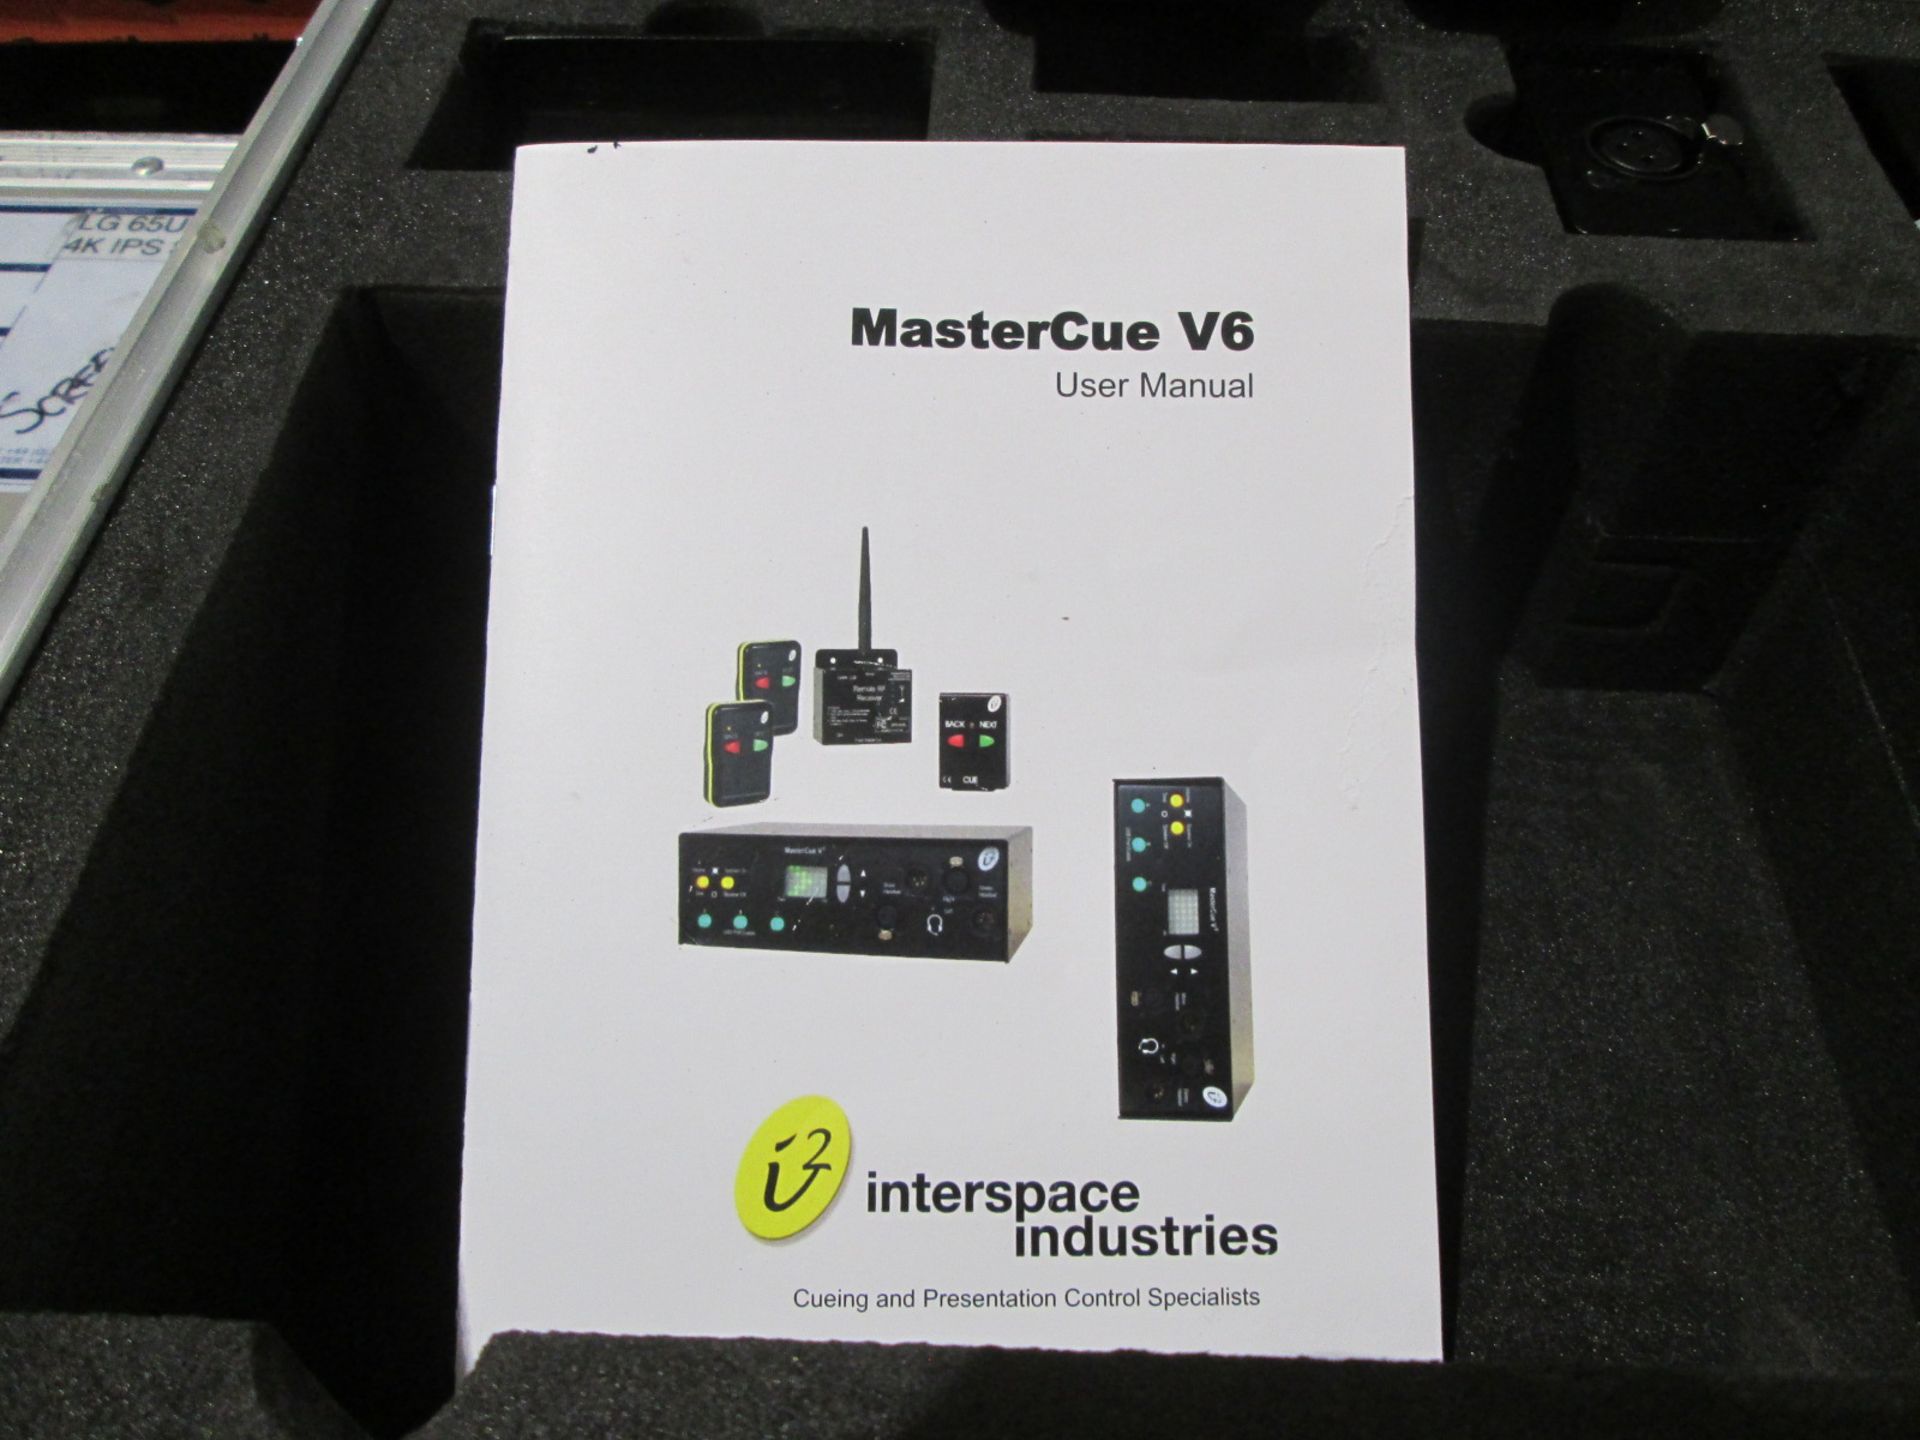 Interspace Industries Mastercue V6 Cue Light Kit (Qty 2) In flight case - Image 4 of 4